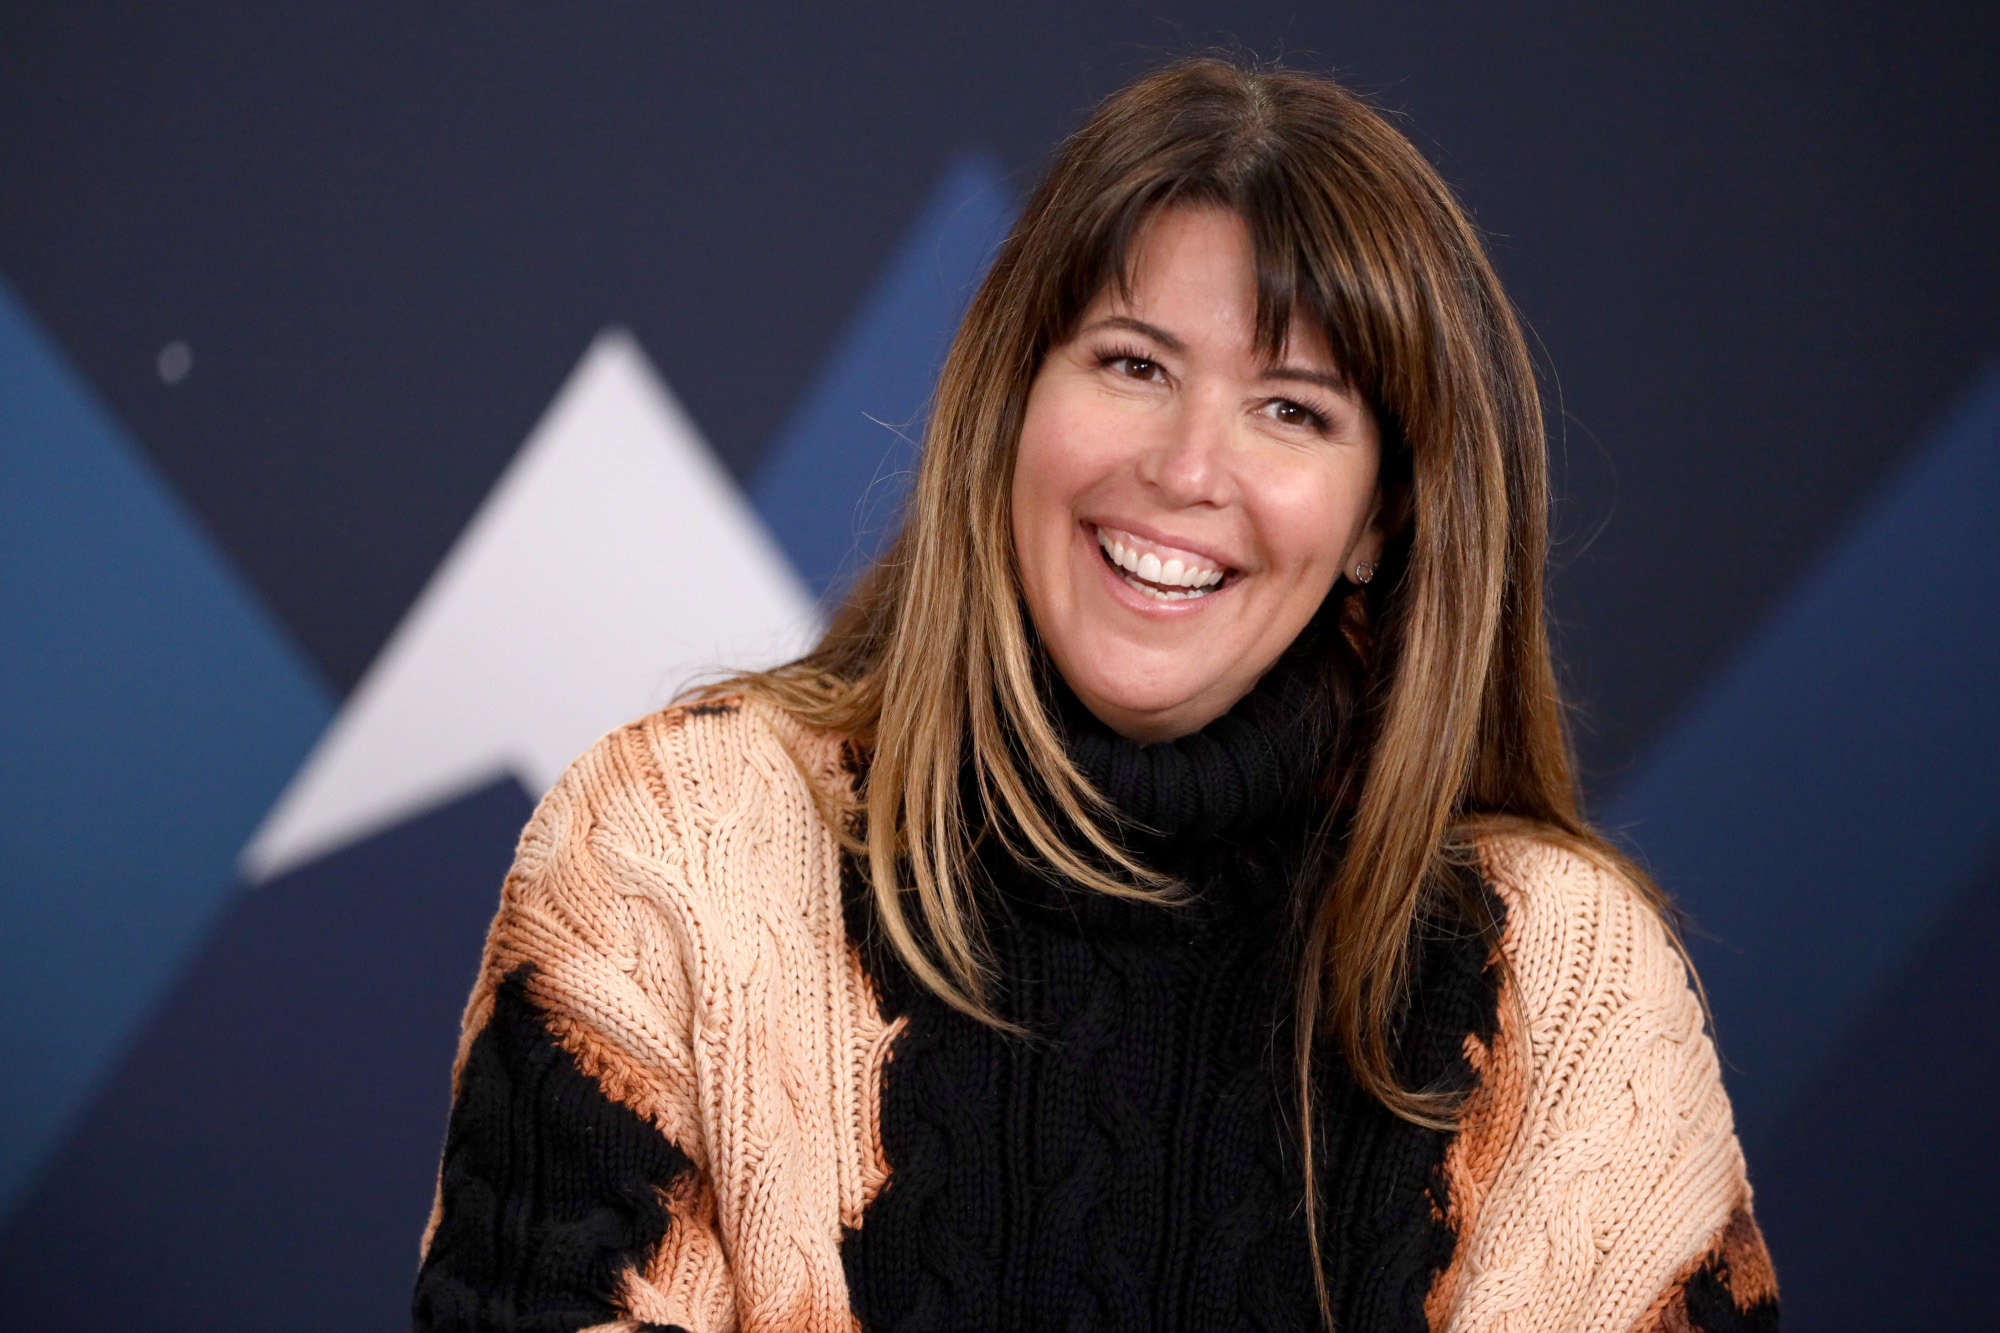 'Wonder Woman: 1984' director Patty Jenkins. Her brown hair is straight and down. She's wearing a black sleeveless shirt and smiling.